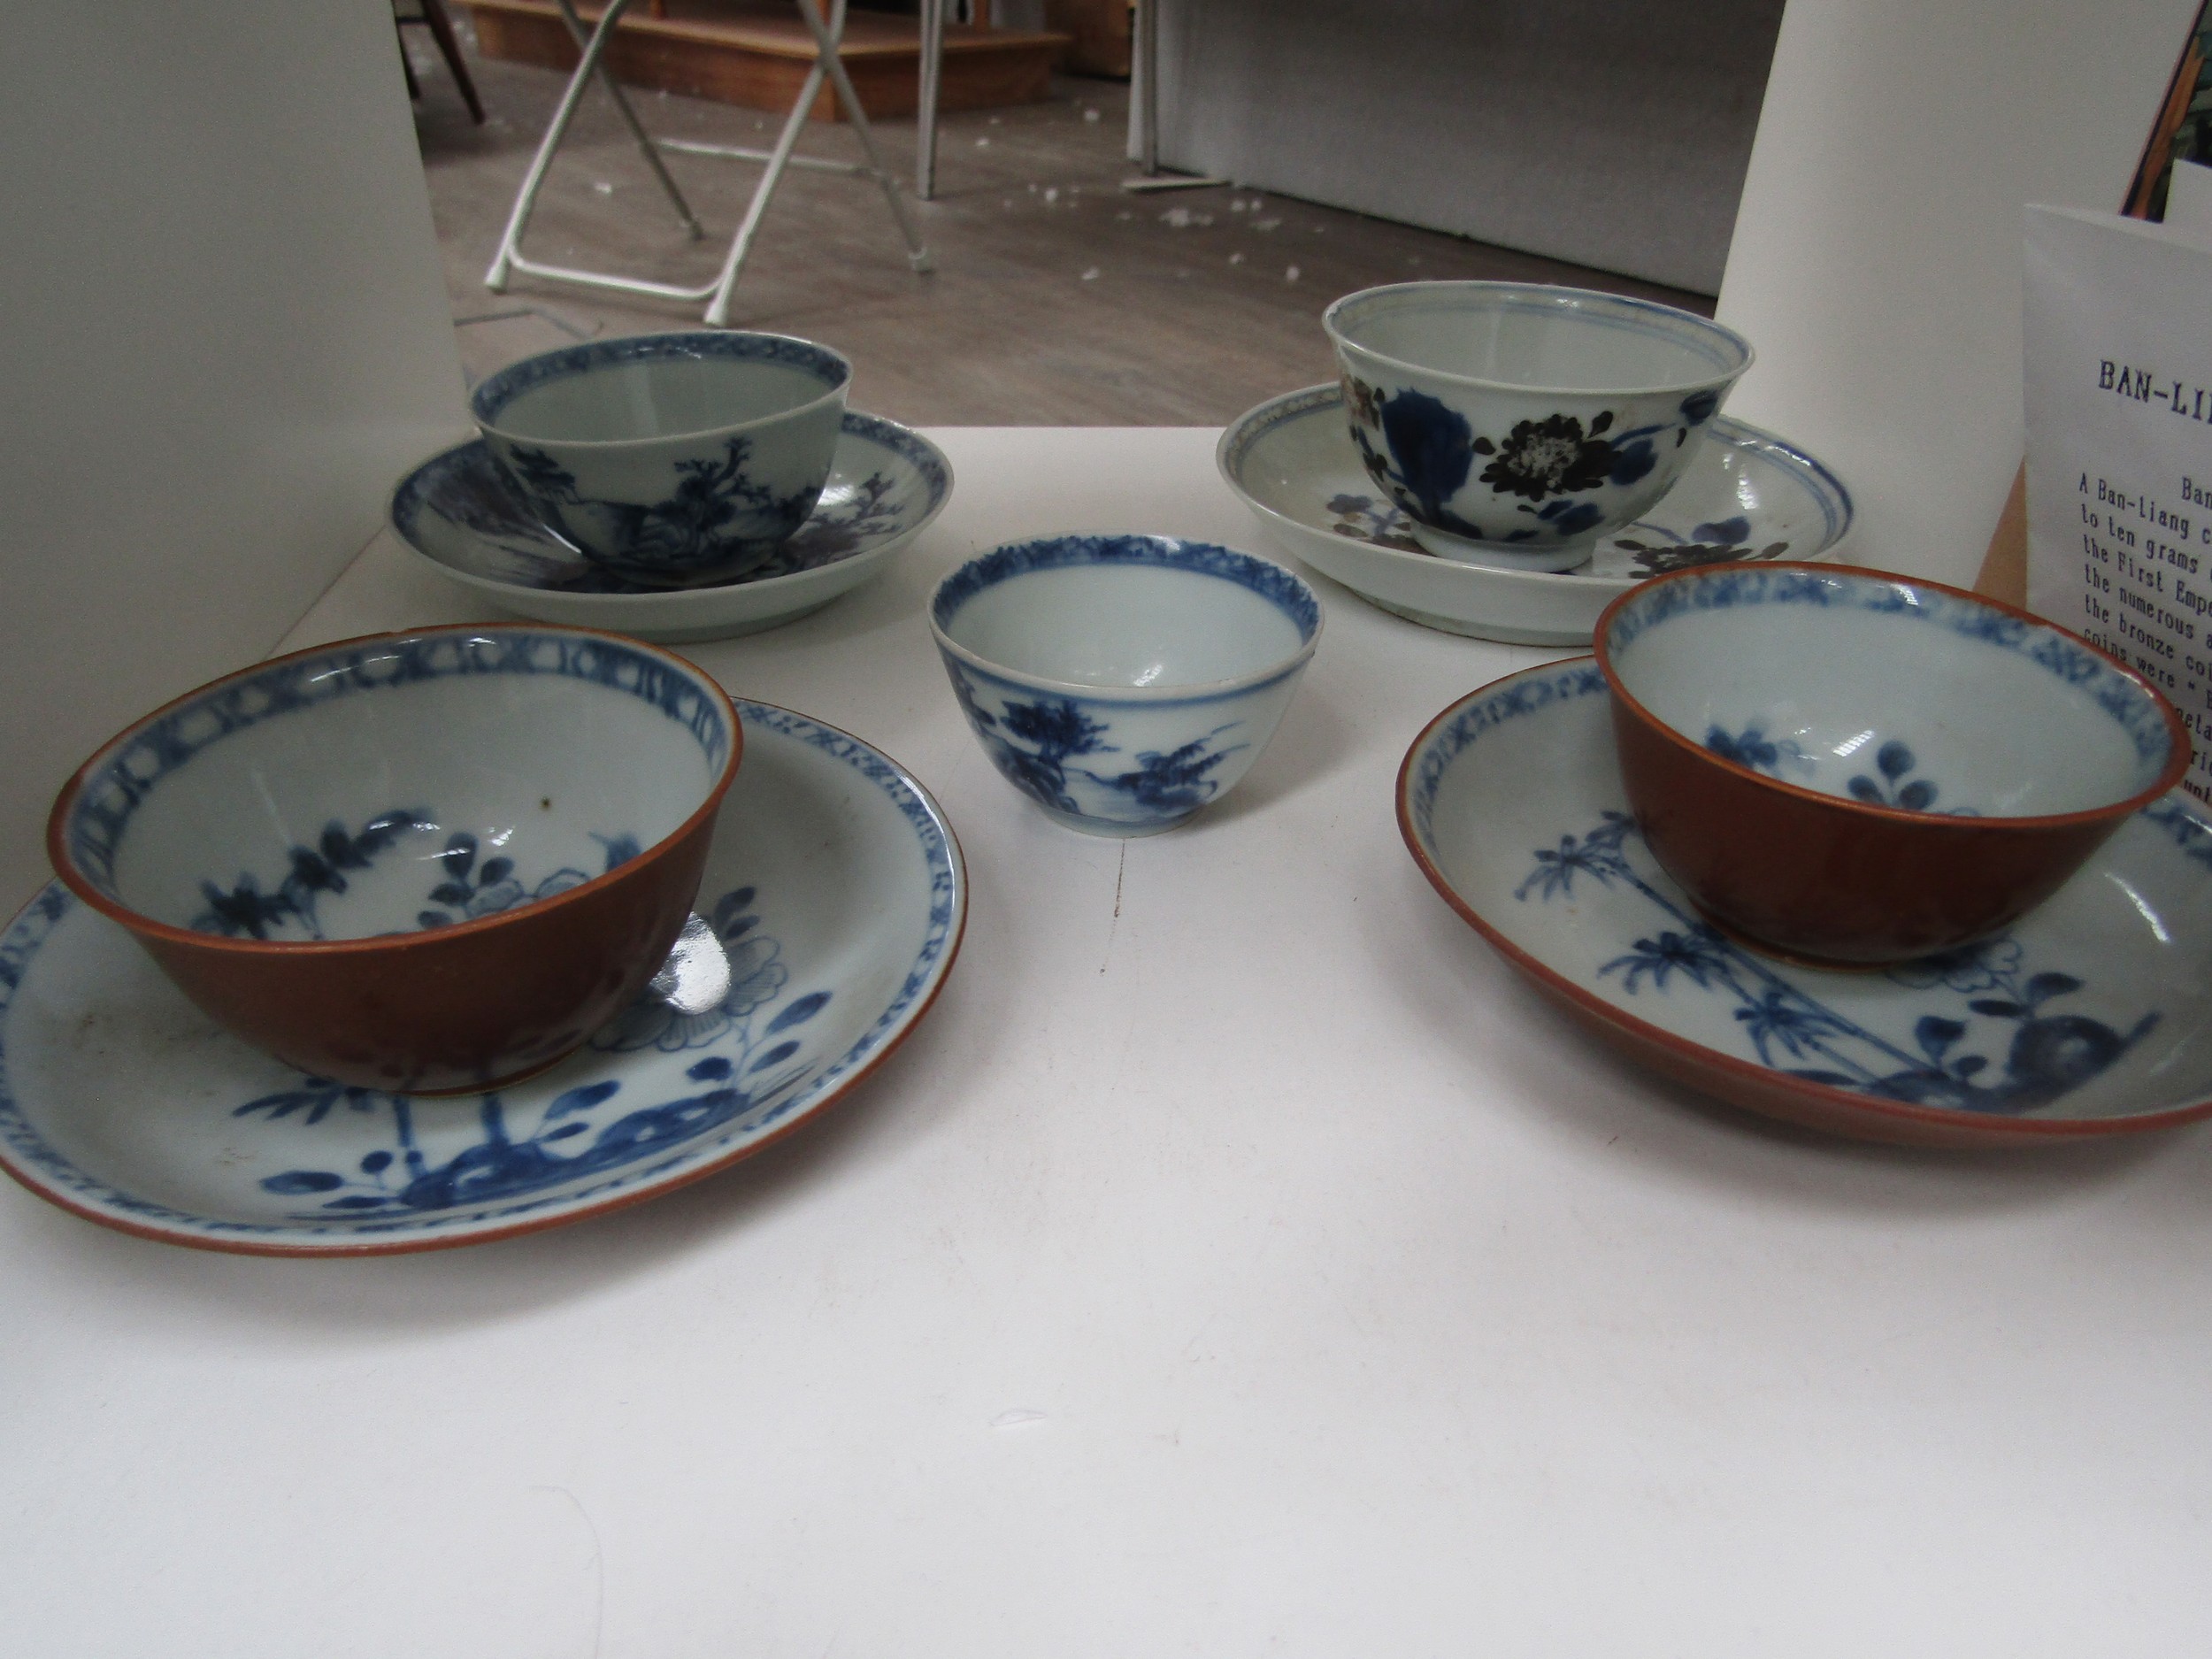 A collection of Nanking Cargo (1752) porcelain consisting of six bowls and saucers, rice bowl, - Image 2 of 5